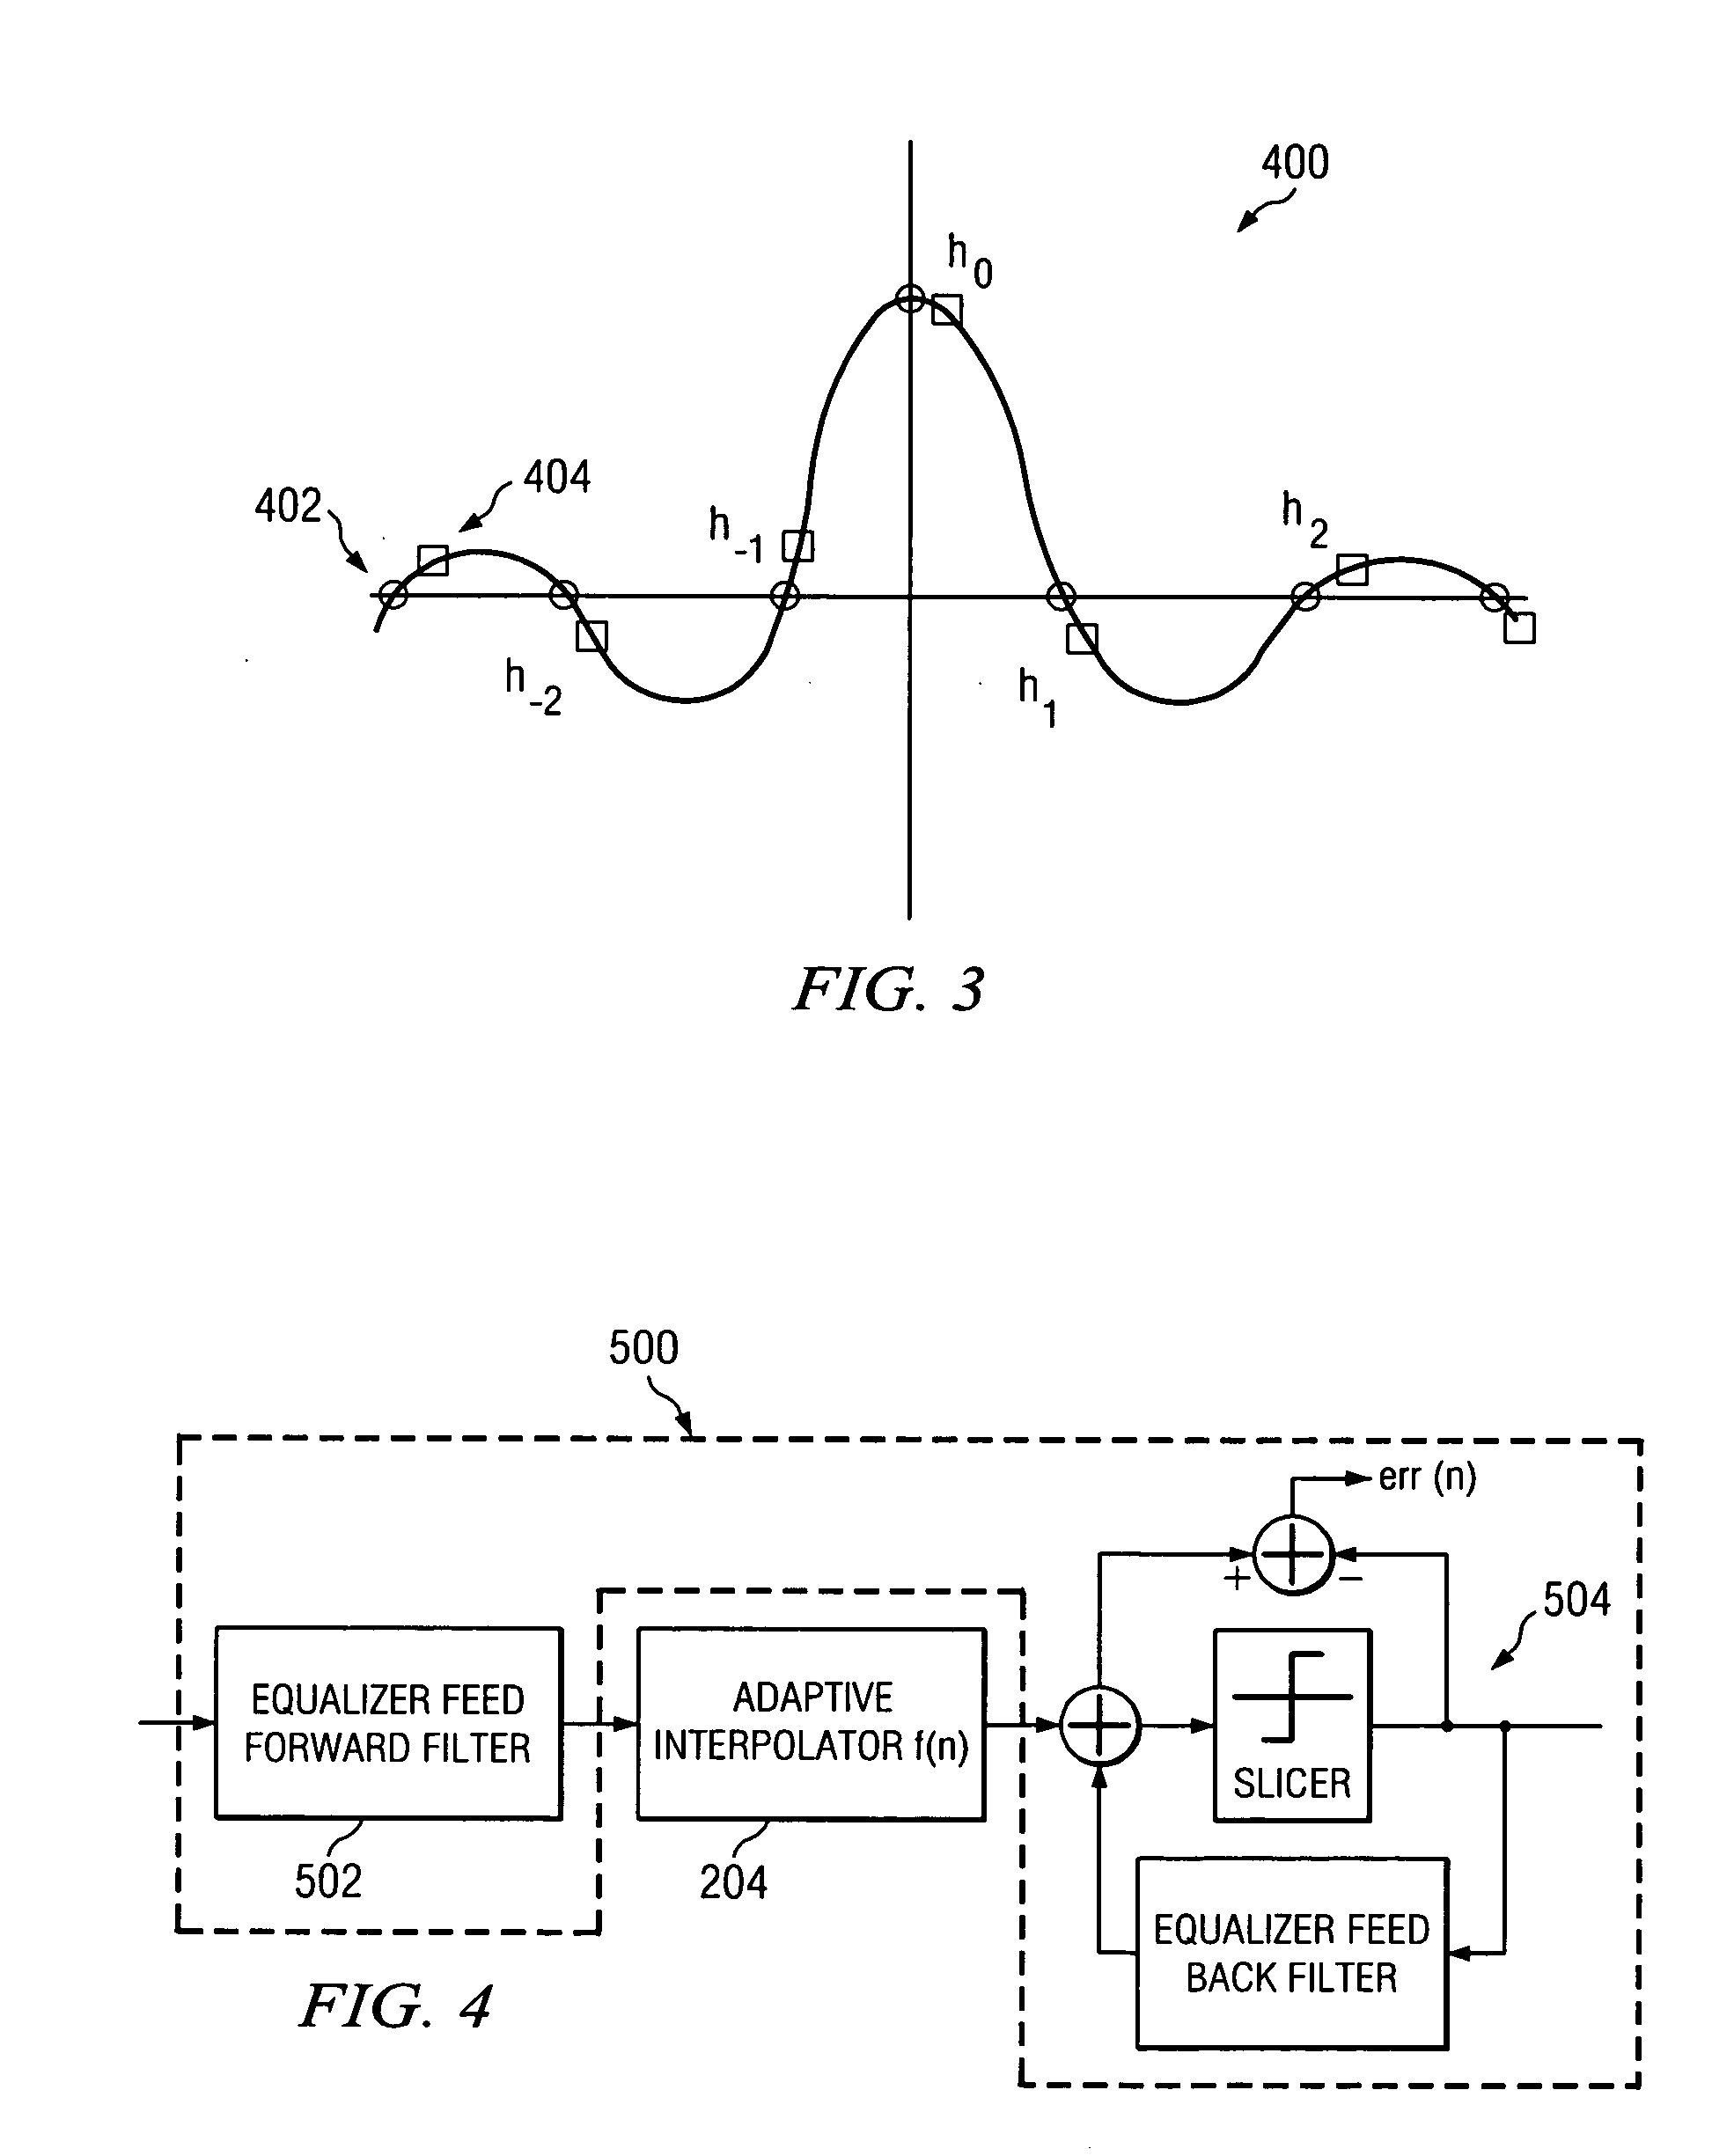 Timing recovery of PAM signals using baud rate interpolation